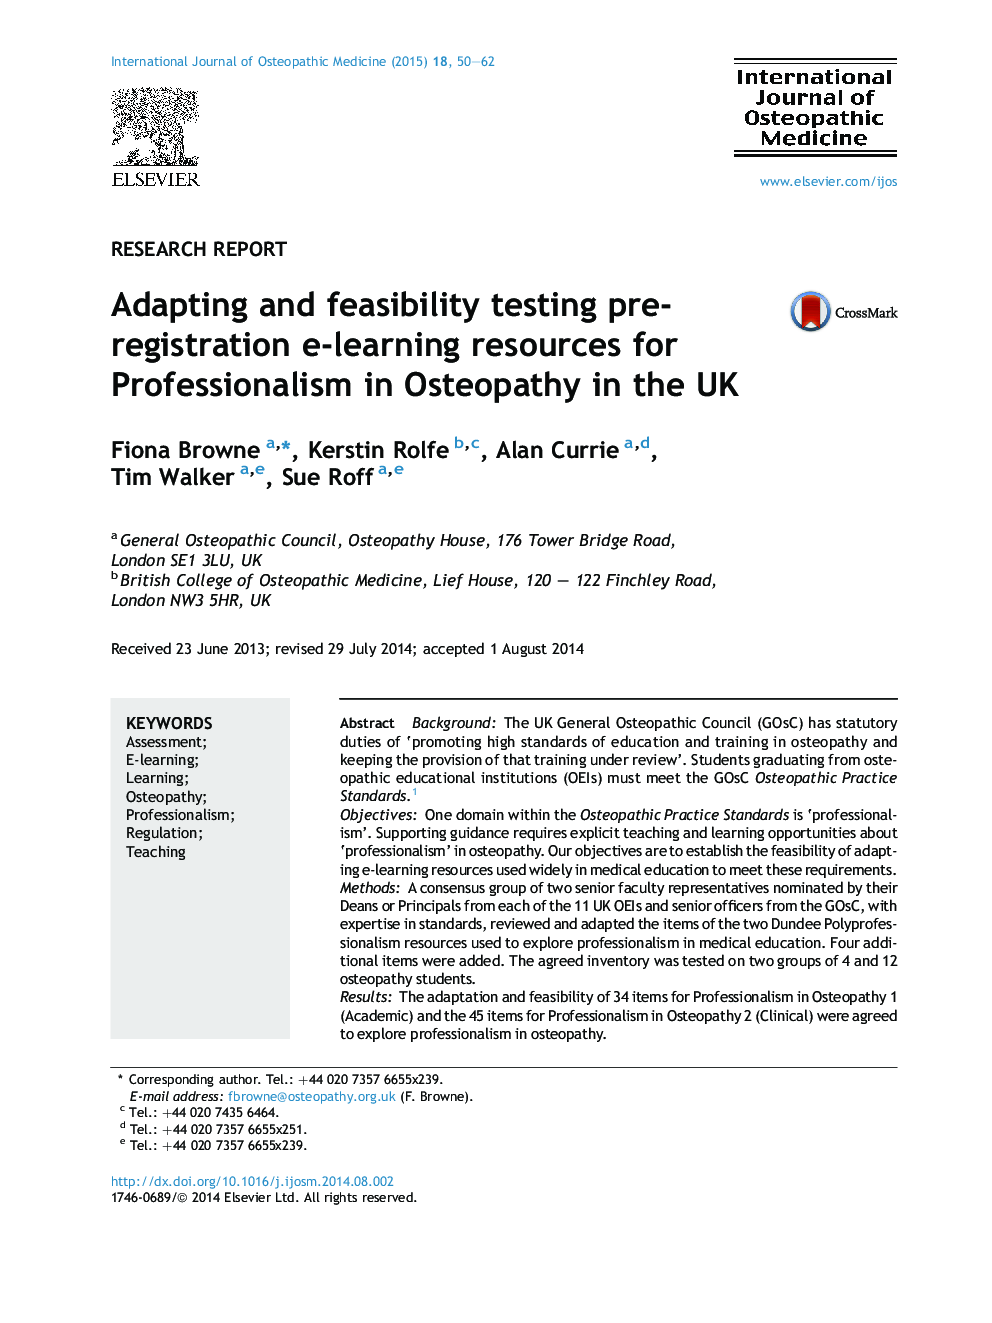 Adapting and feasibility testing pre-registration e-learning resources for Professionalism in Osteopathy in the UK